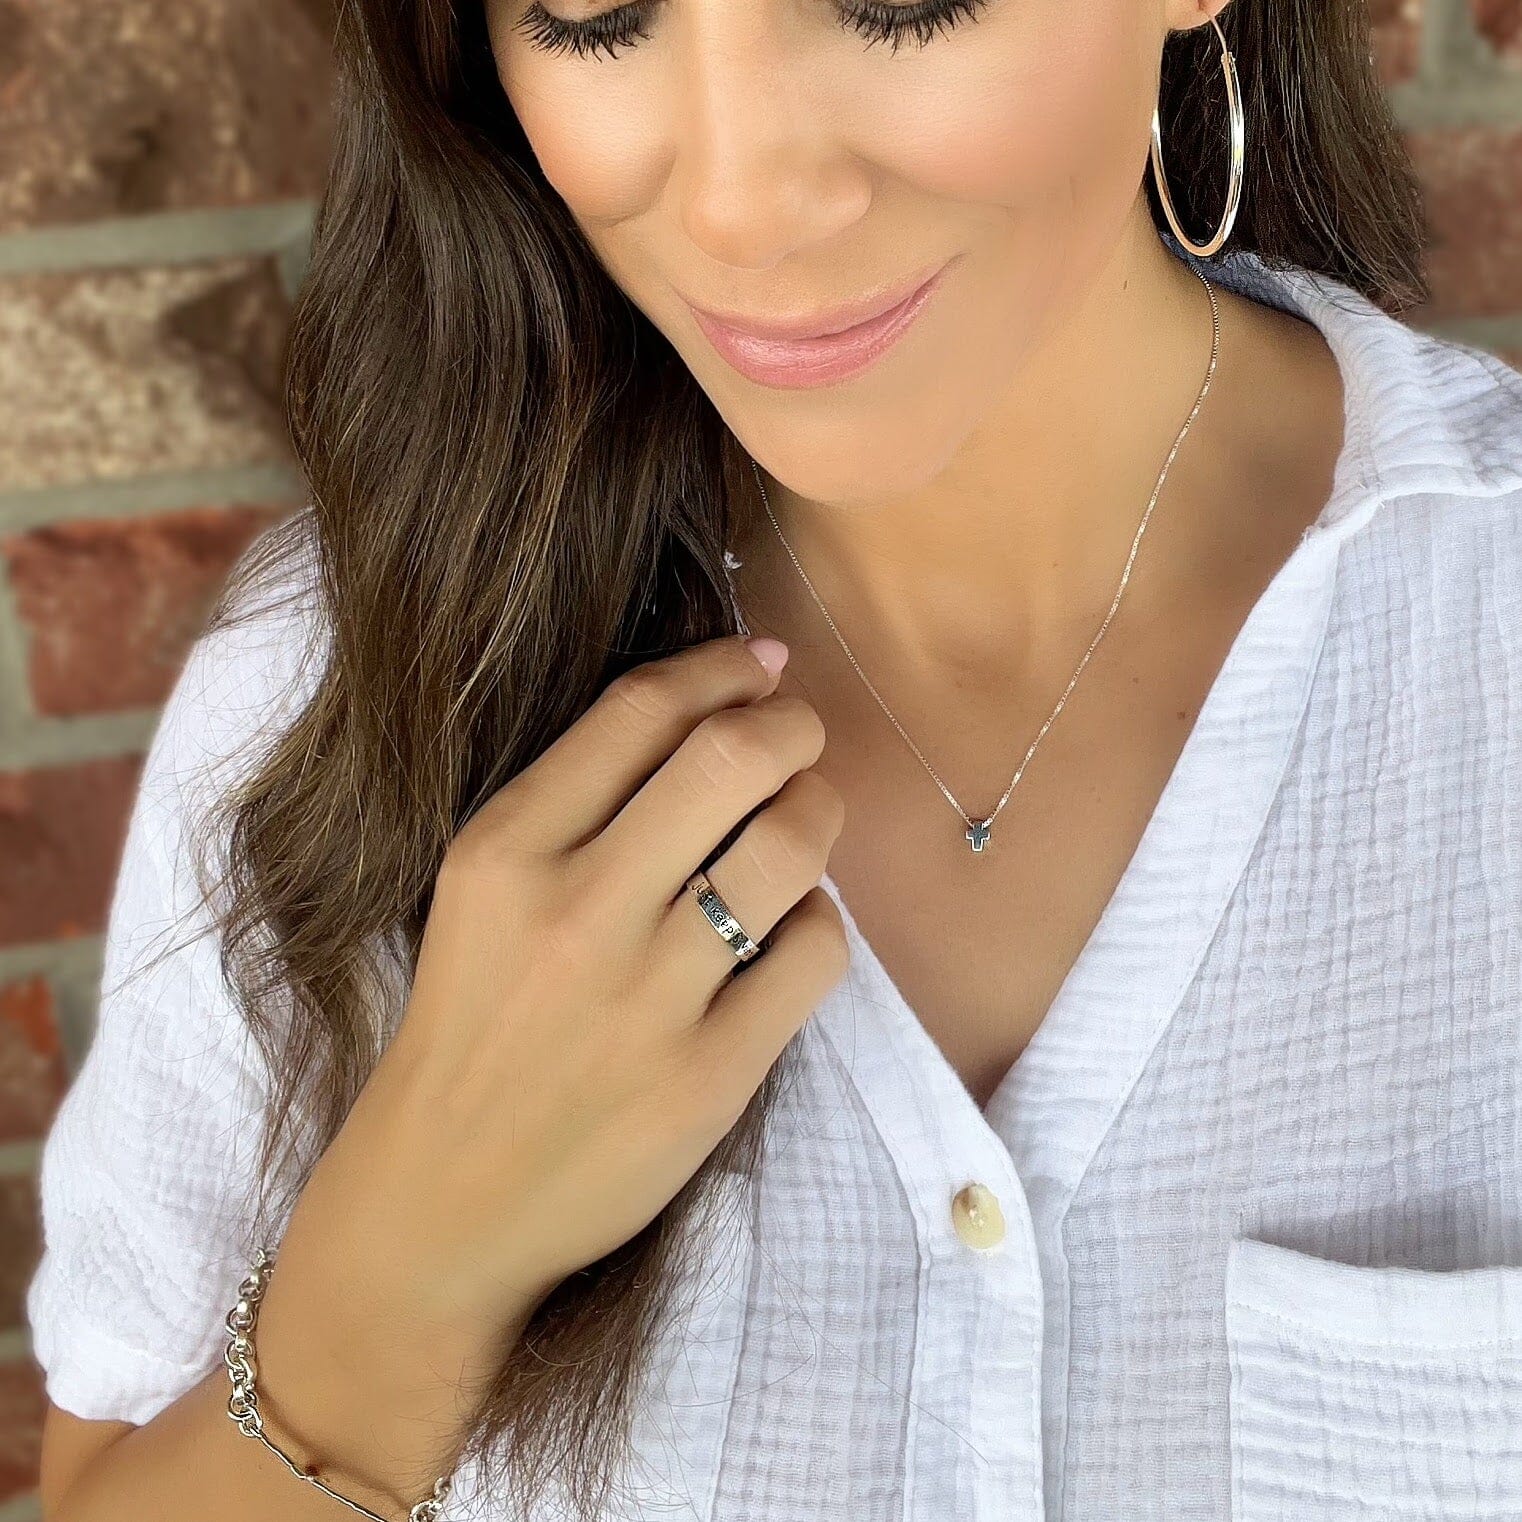 Just Keep Swimming Ring paired with Simply the Best Hoops, Itty Bitty Cross Necklace, and Cherished One Bracelet